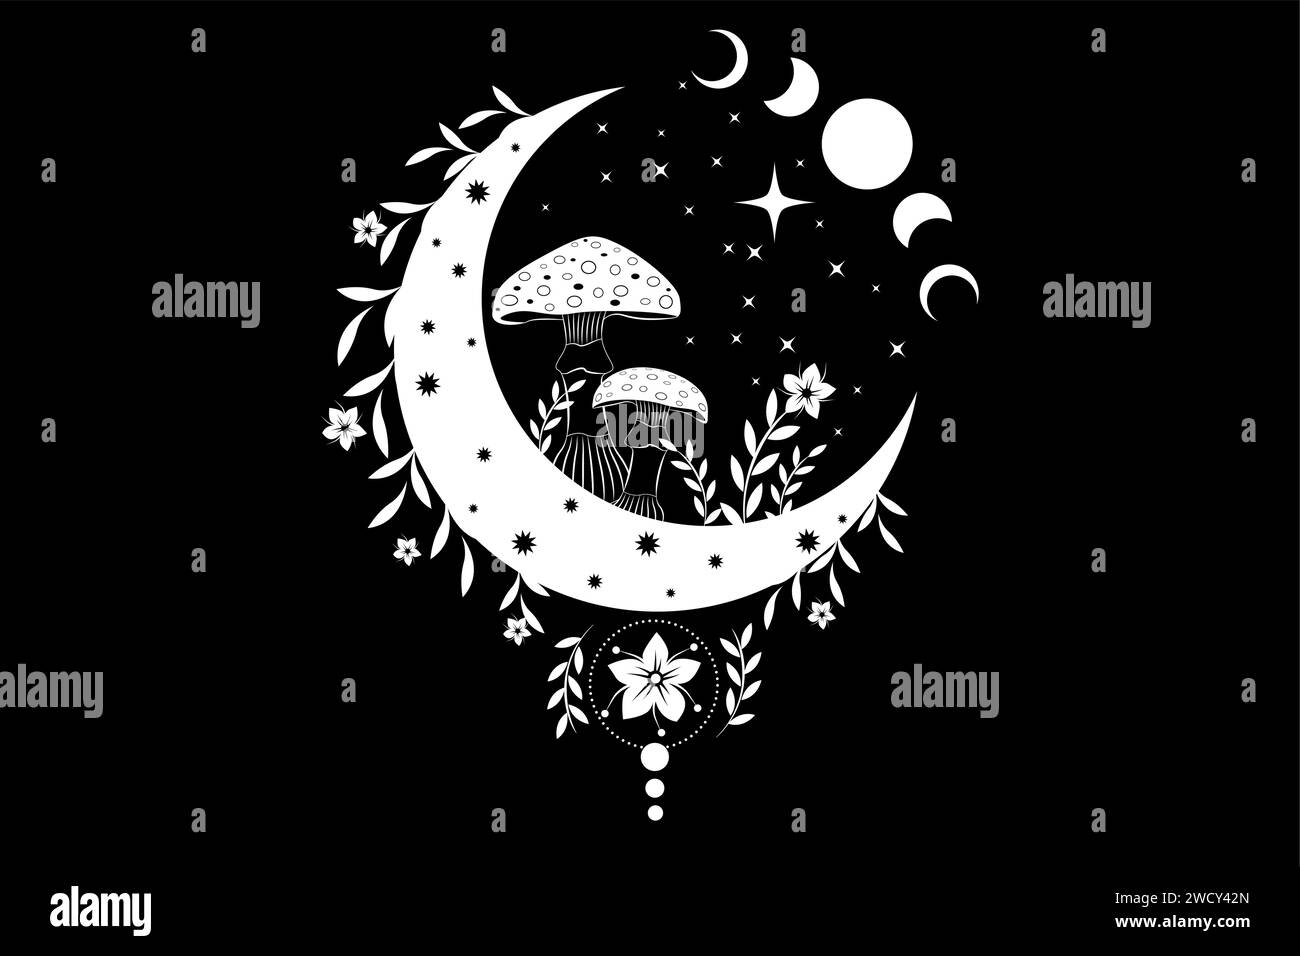 Magic mushrooms on mystical crescent moon in boho style, celestial Amanita Muscaria and Moon Phase, witchcraft symbol, witchy esoteric white logo Stock Vector